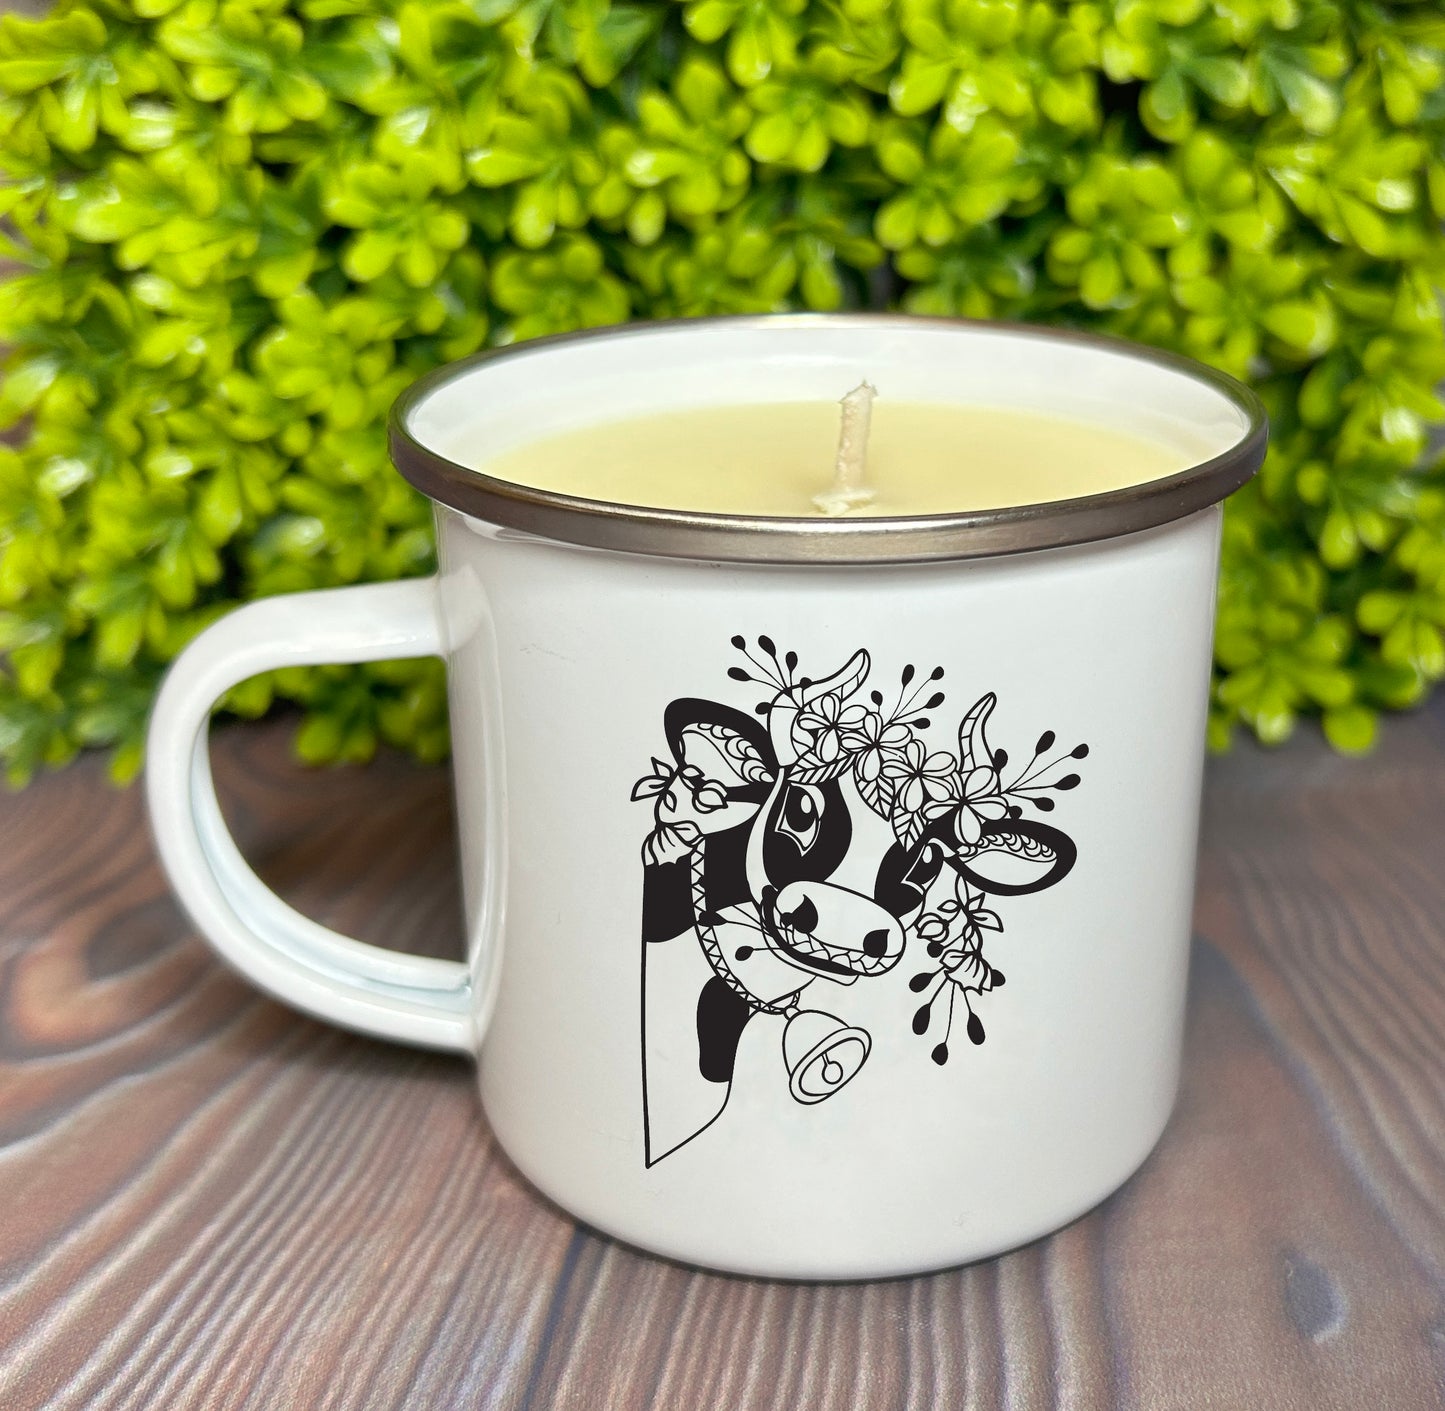 Enamel Mug Candle -  Clever Cow Candle Co Signature Cow